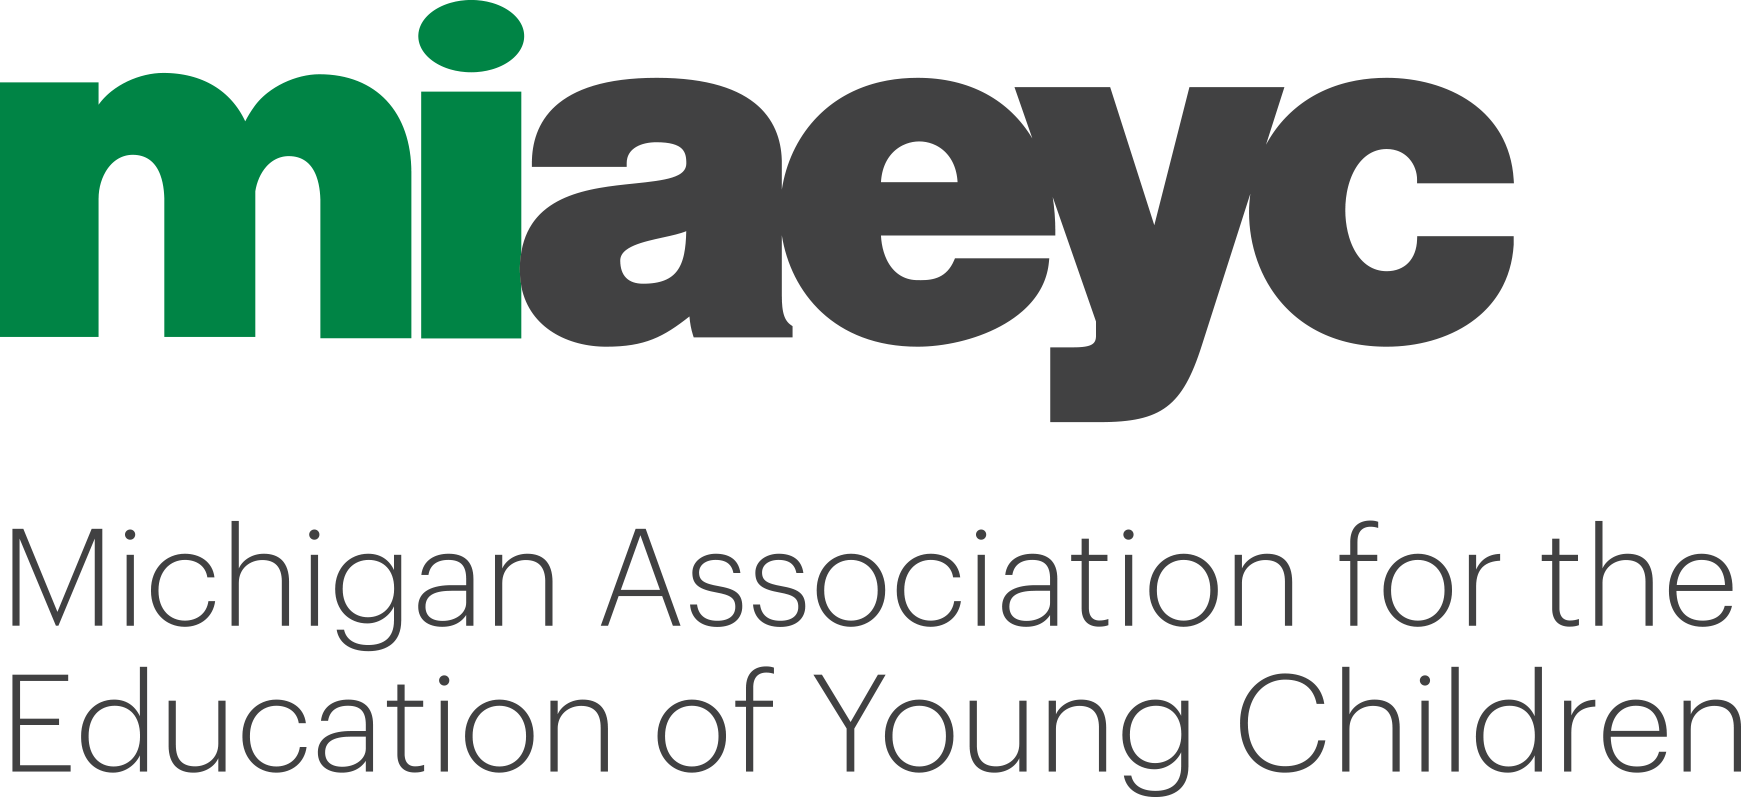 Michigan Association for the Education of Young Children